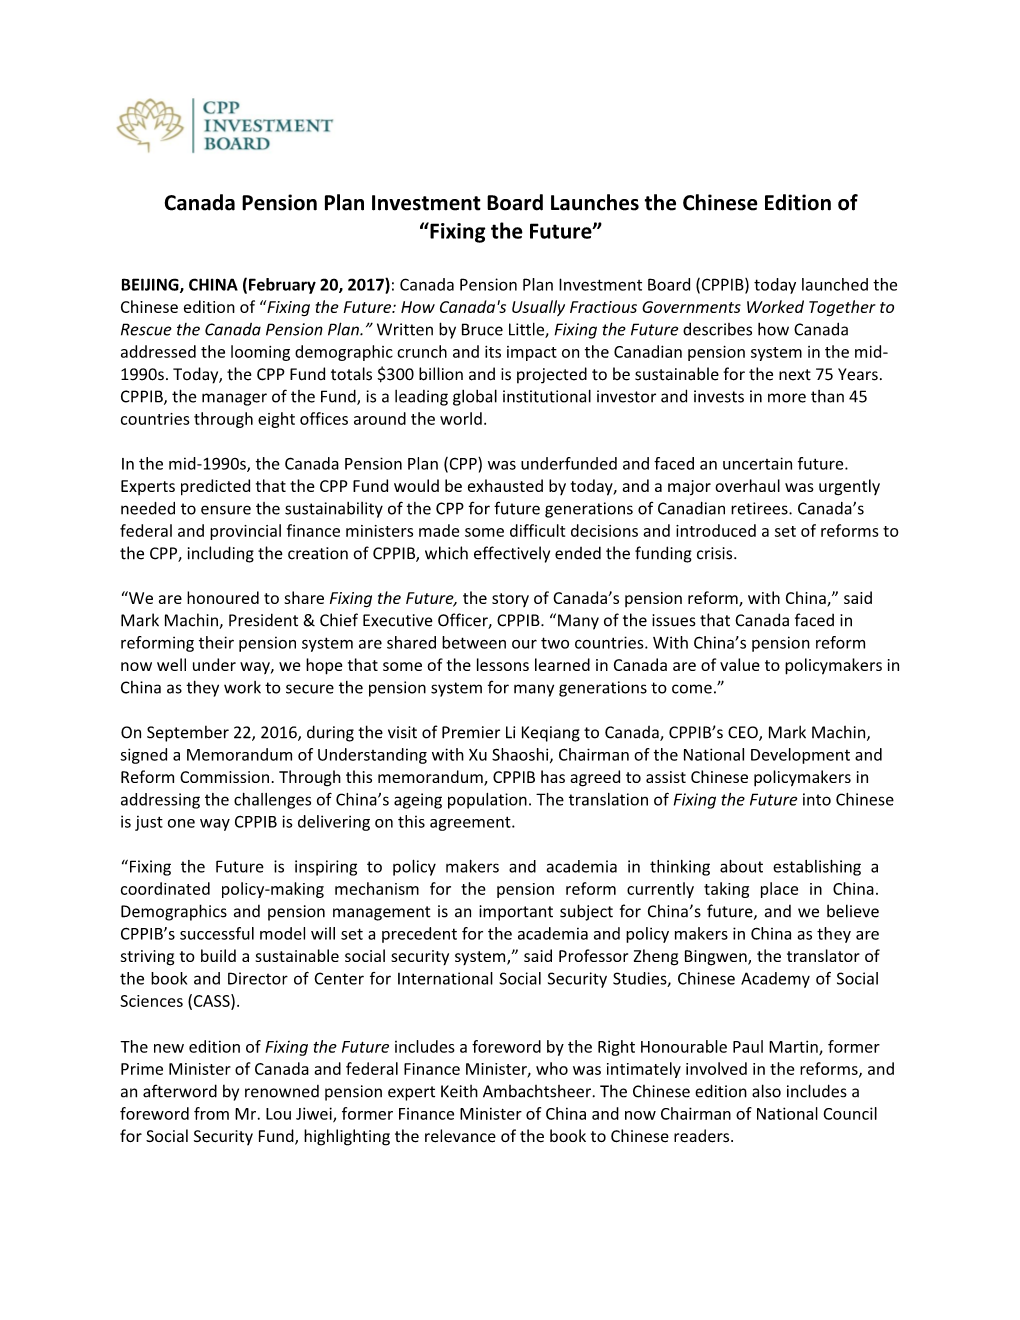 Canada Pension Plan Investment Board Launches the Chinese Edition of “Fixing the Future”